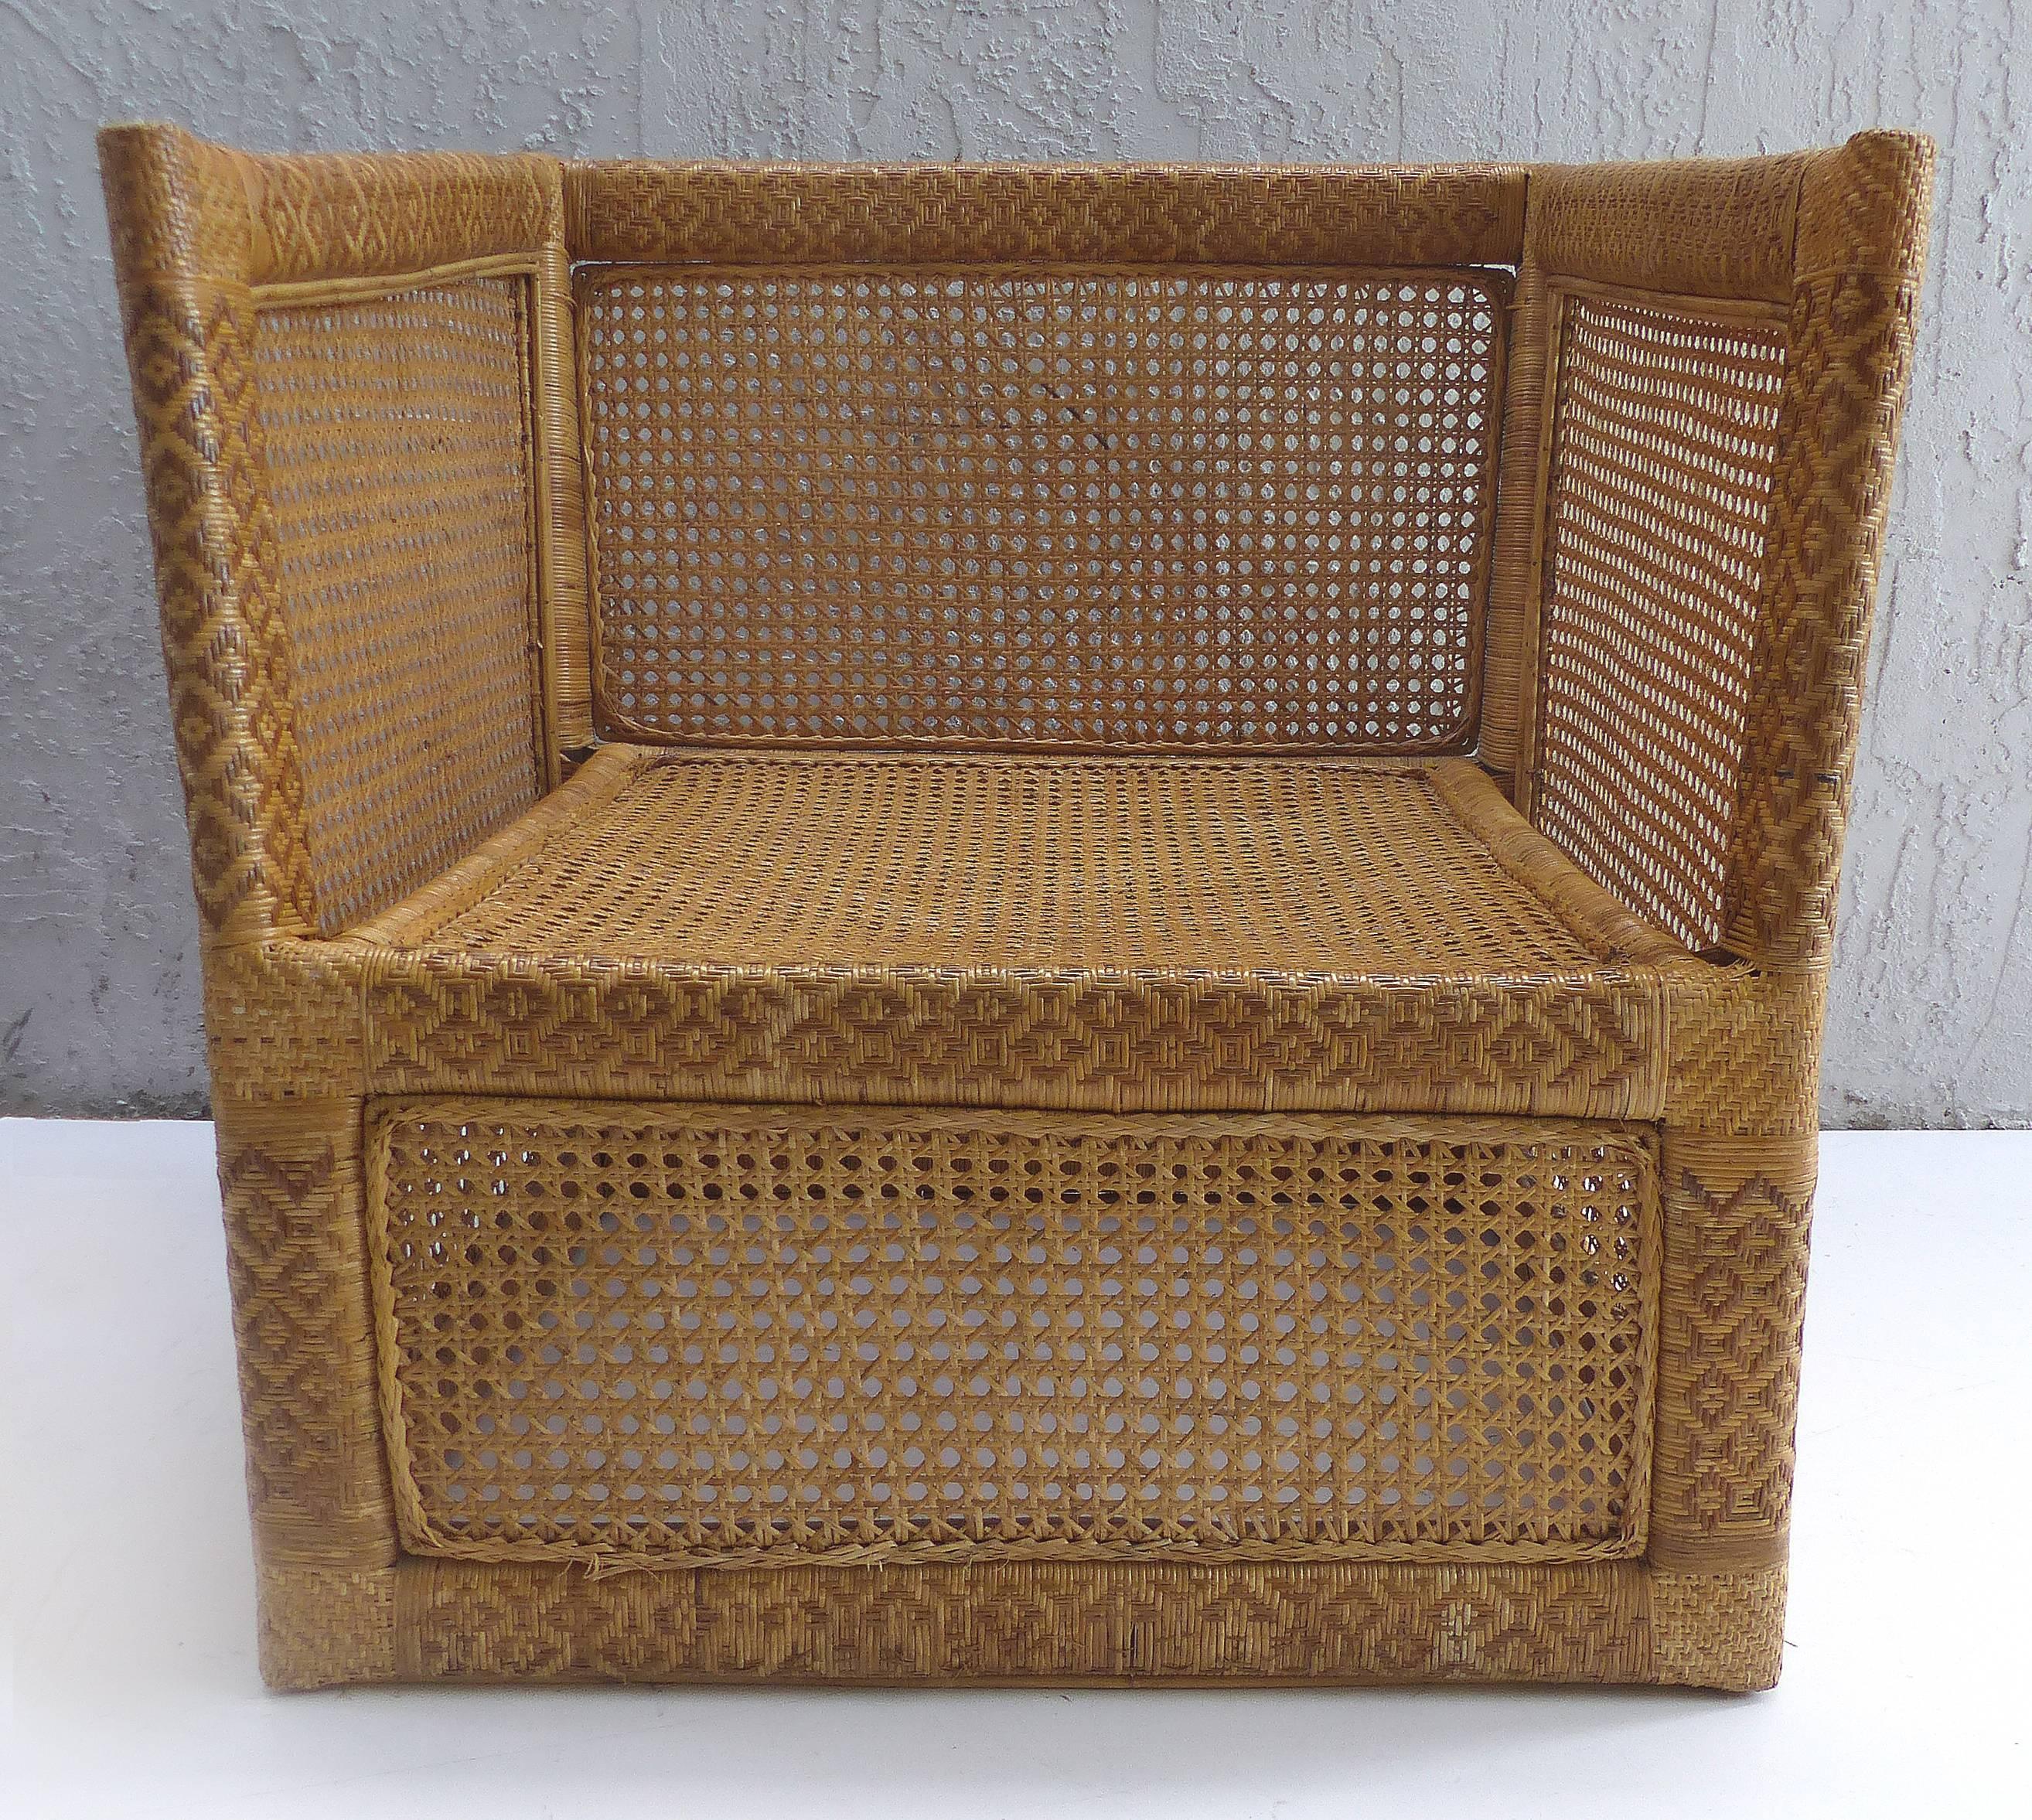 Offered or sale is a stunning pair of woven wicker and rattan club chairs acquired in Vietnam during the 1960s. These chairs were acquired by an American diplomat during his appointment in Vietnam. The chairs include cushions covered in vintage